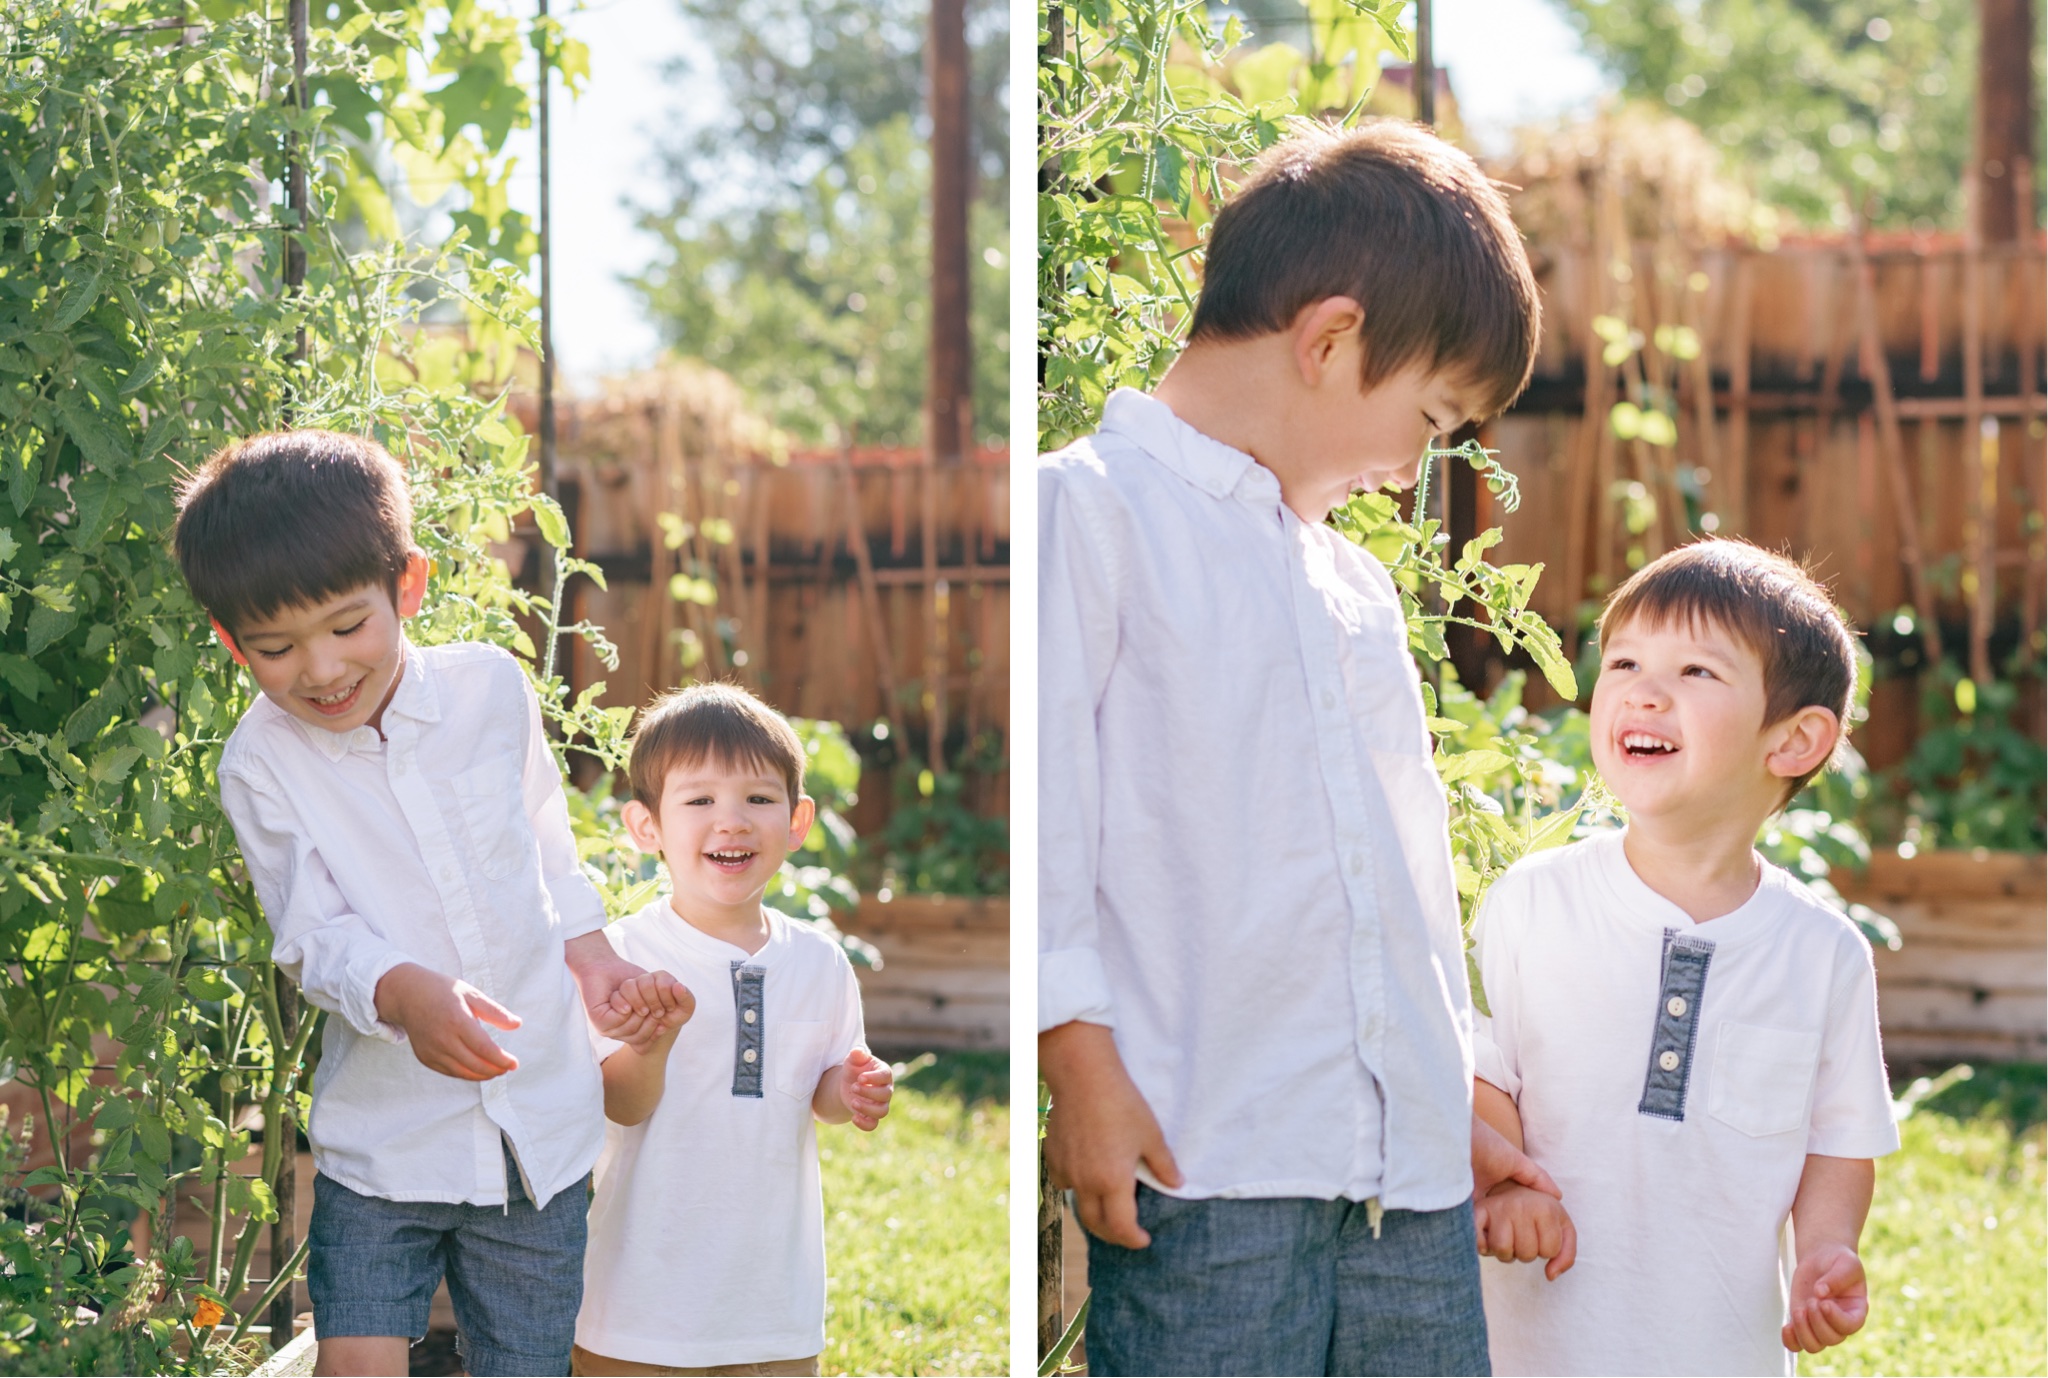 Two brothers laughing and playing in their vegetable garden in Denver Colorado during a motherhood photoshoot